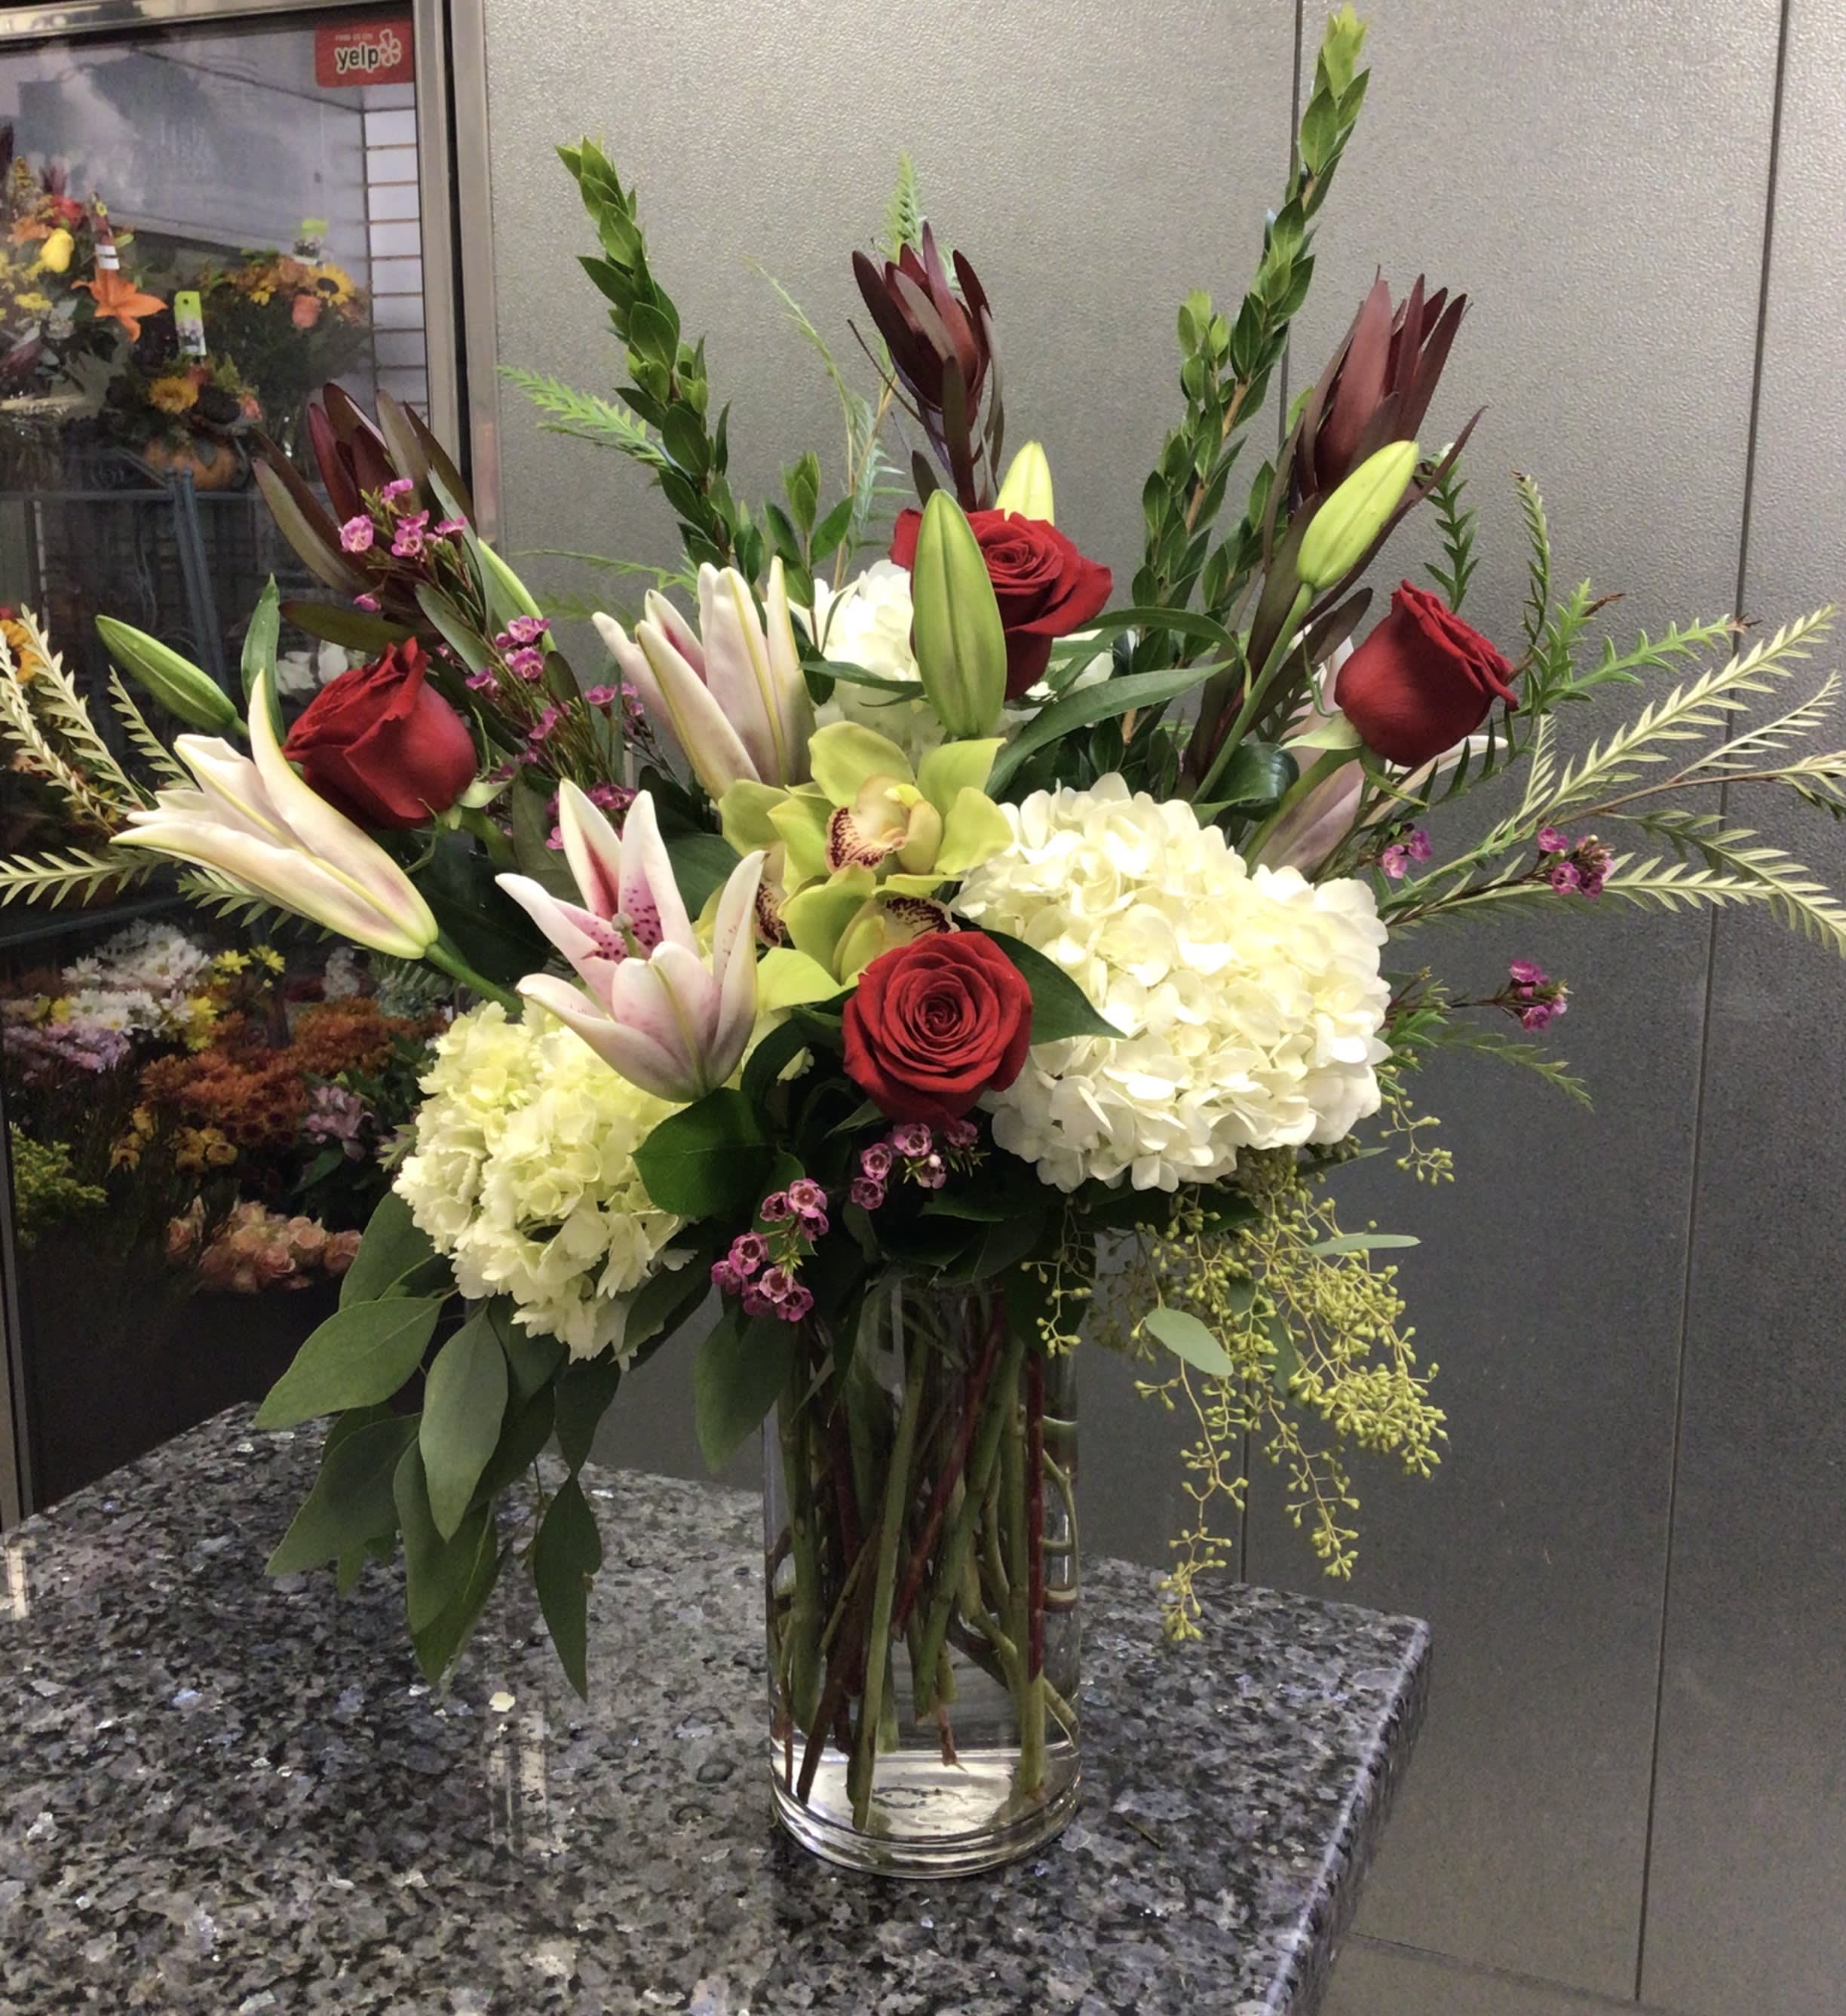 Sweetheart - This Tall Mixed Arrangement includes Red Roses, Safari Sunset, White Hydrangea's, Pink Lilies and a Green Cymbidium Orchid Bloom with Greenery and a Glass Vase. Or as Similar as Possible Depending on Stock Availability.